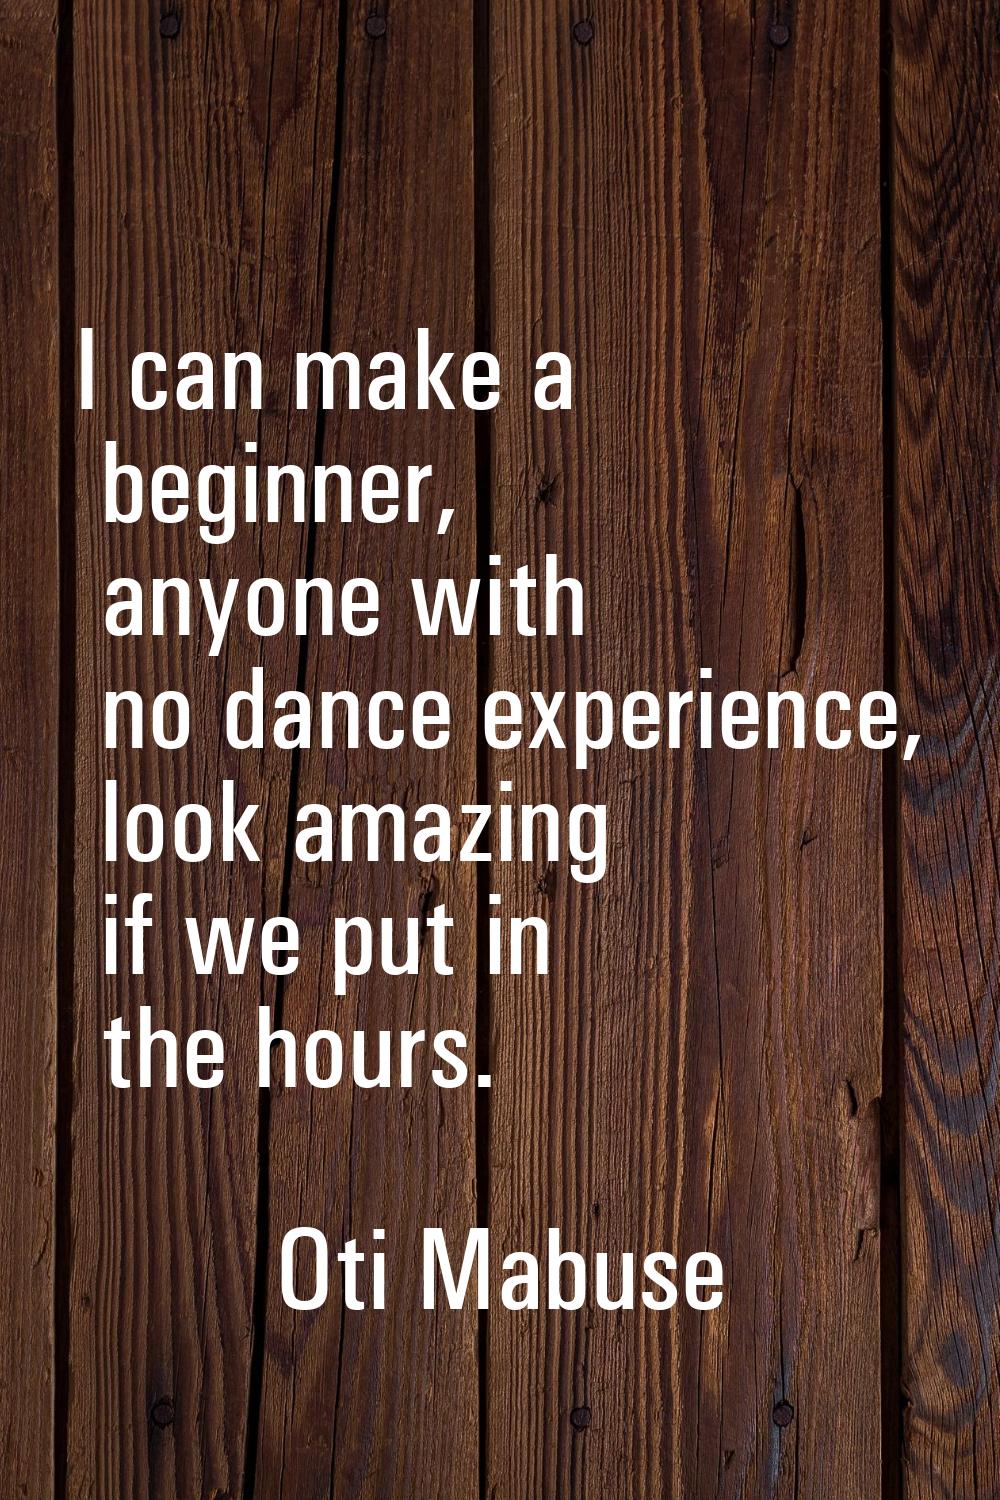 I can make a beginner, anyone with no dance experience, look amazing if we put in the hours.